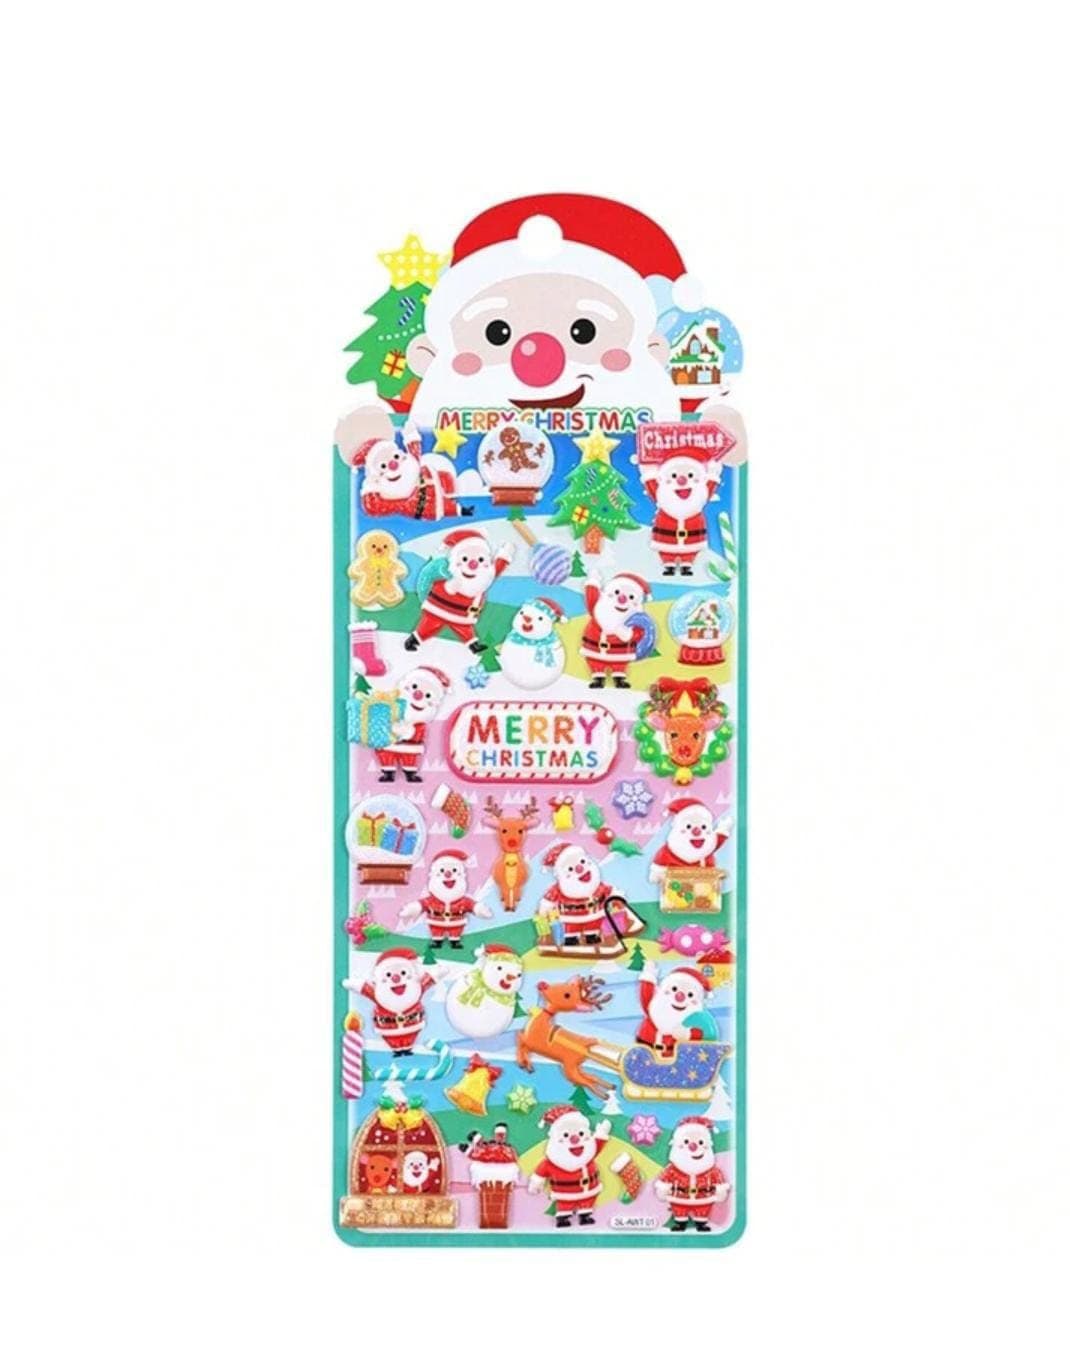 Bright International Decorative Stickers Christmas 3D Three-Dimensional Sticker Set - Santa Claus, Christmas Tree, Gift Box, Snowman, Party Decoration for Cups, Mobiles, and Stationery (Pack of 1)